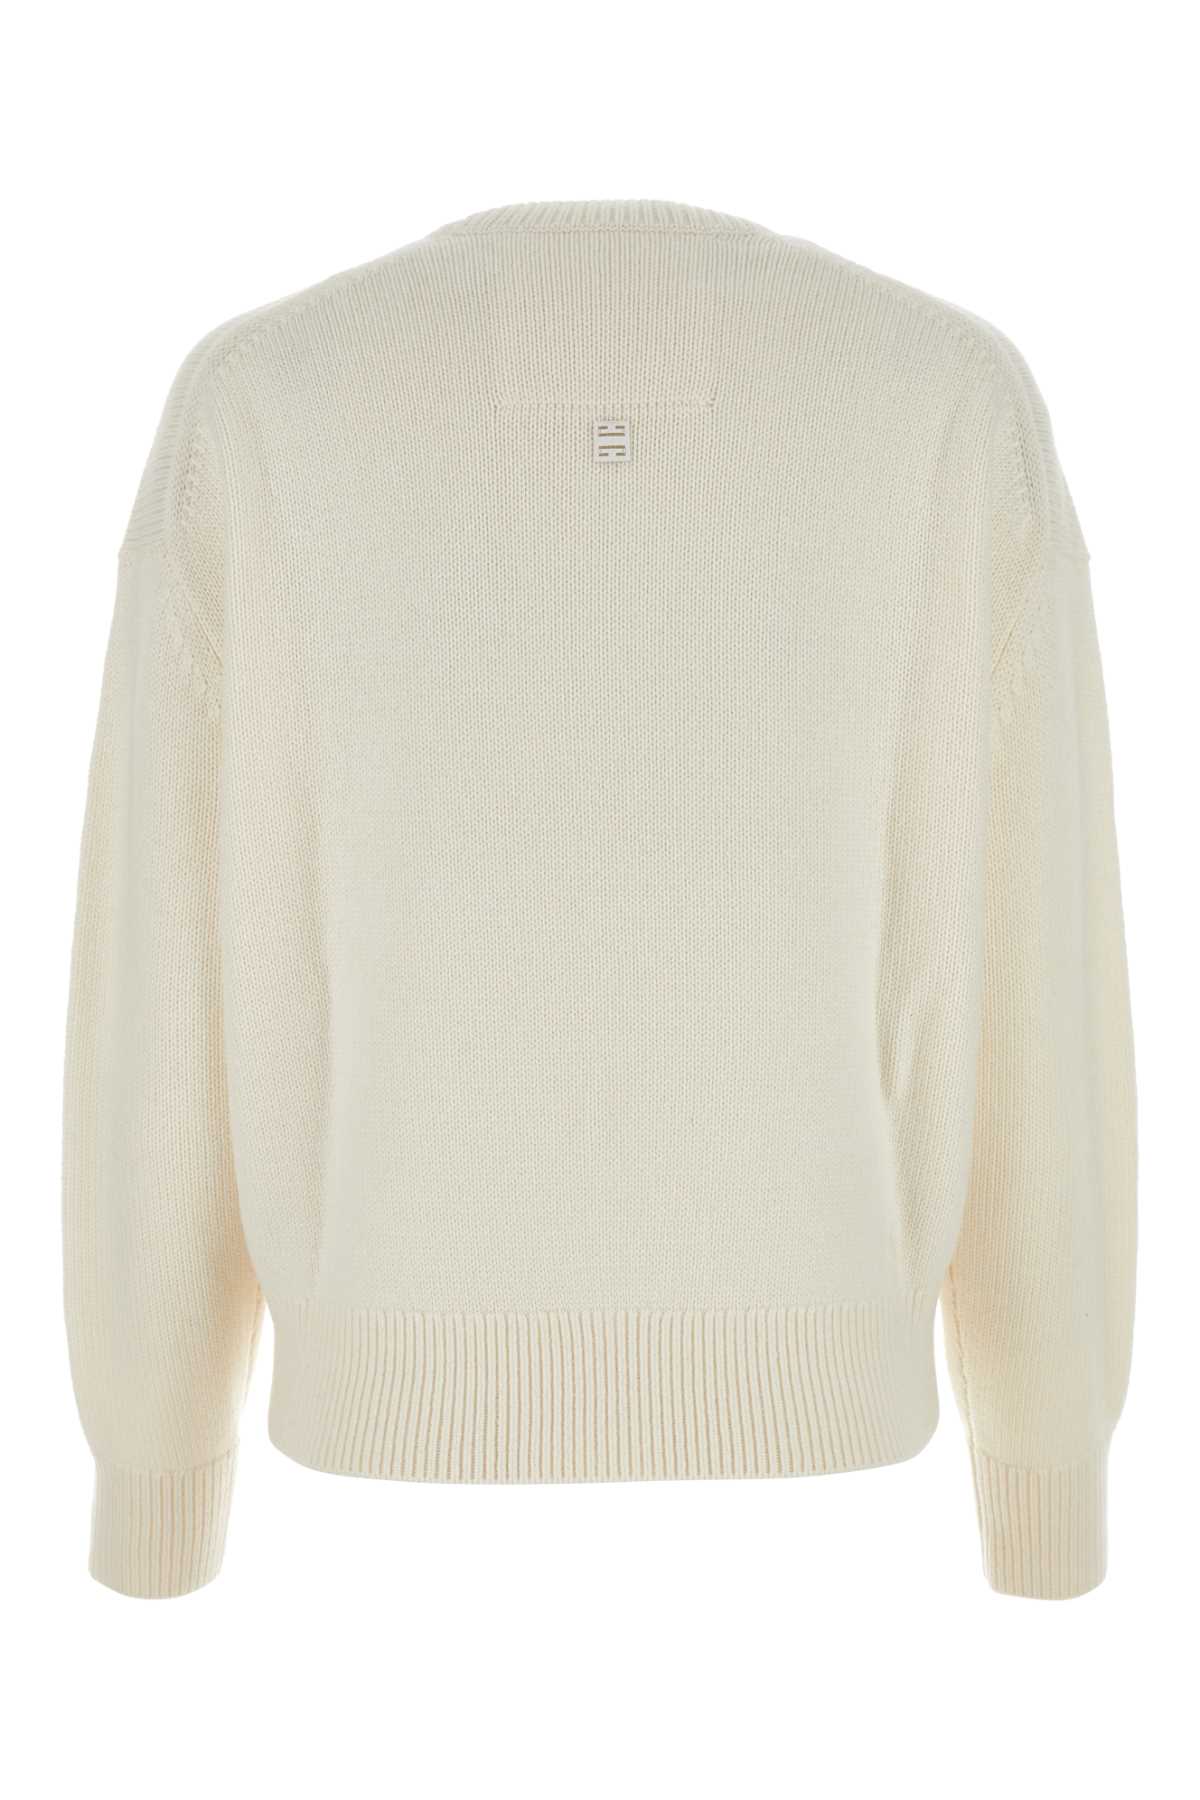 Shop Givenchy Ivory Cashmere Sweater